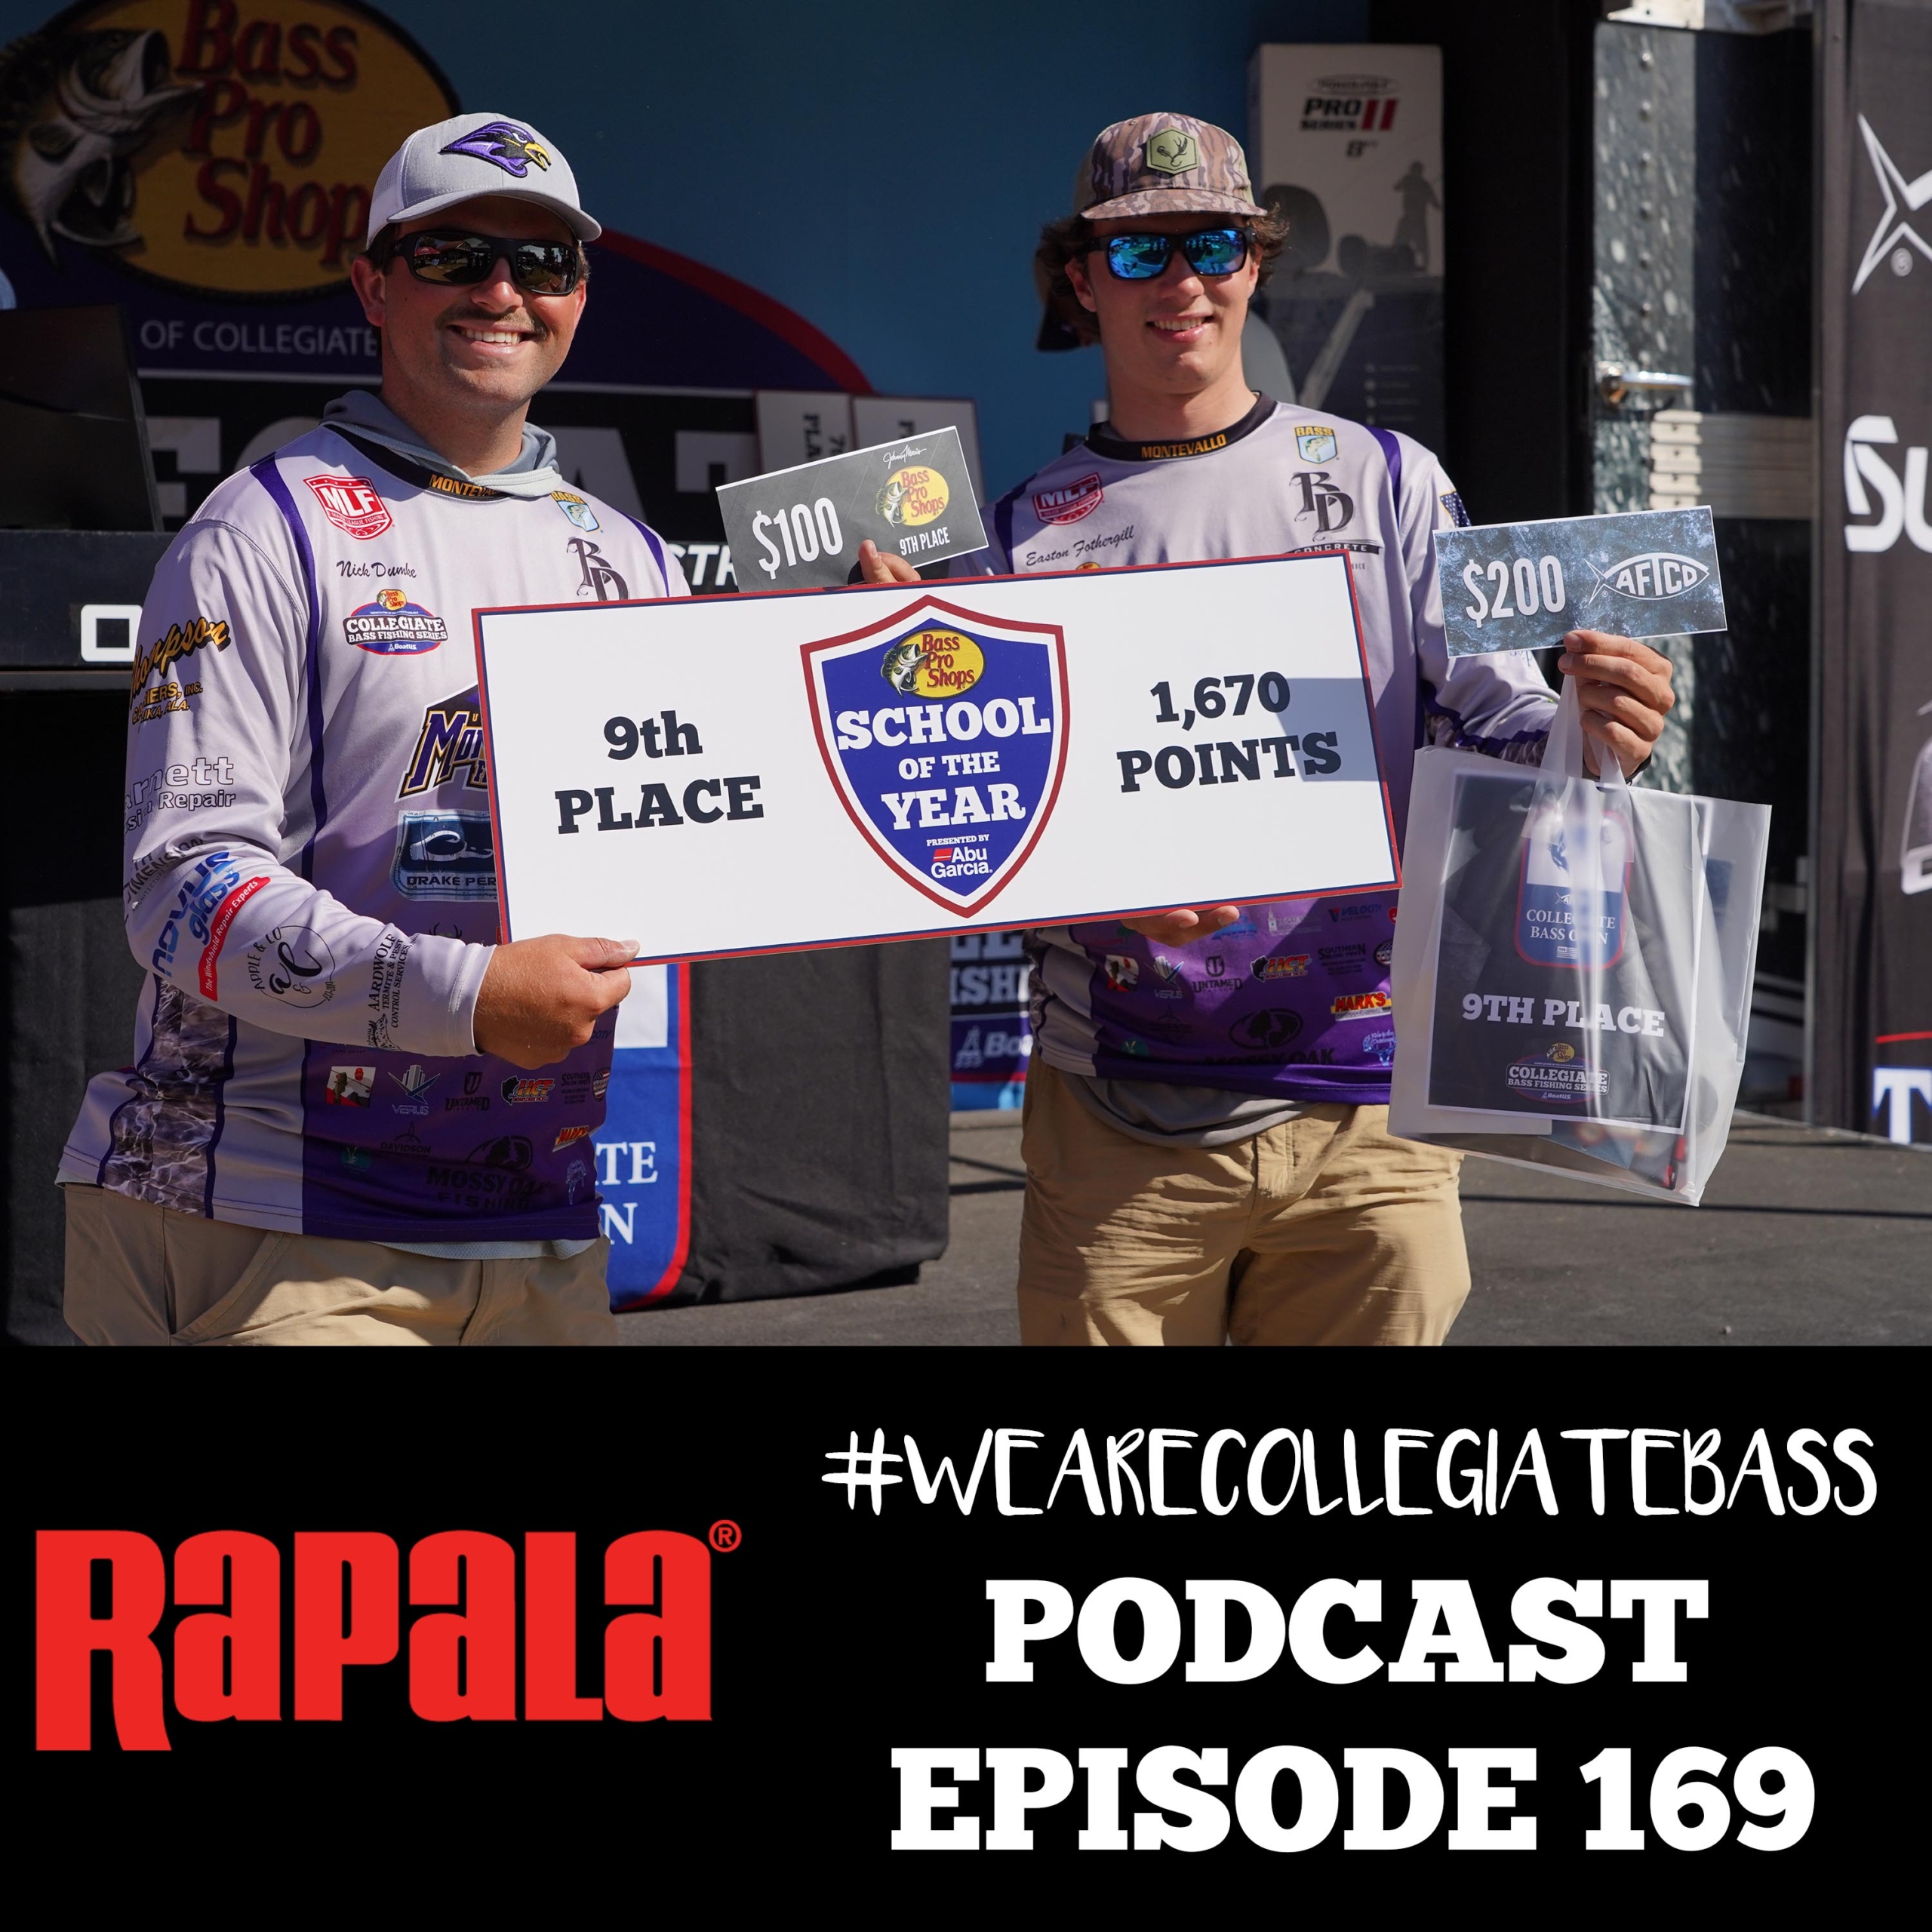 EP. 169 - Montevallo is Ranked #1 for the First Time this Season -  Collegiate Bass Championship